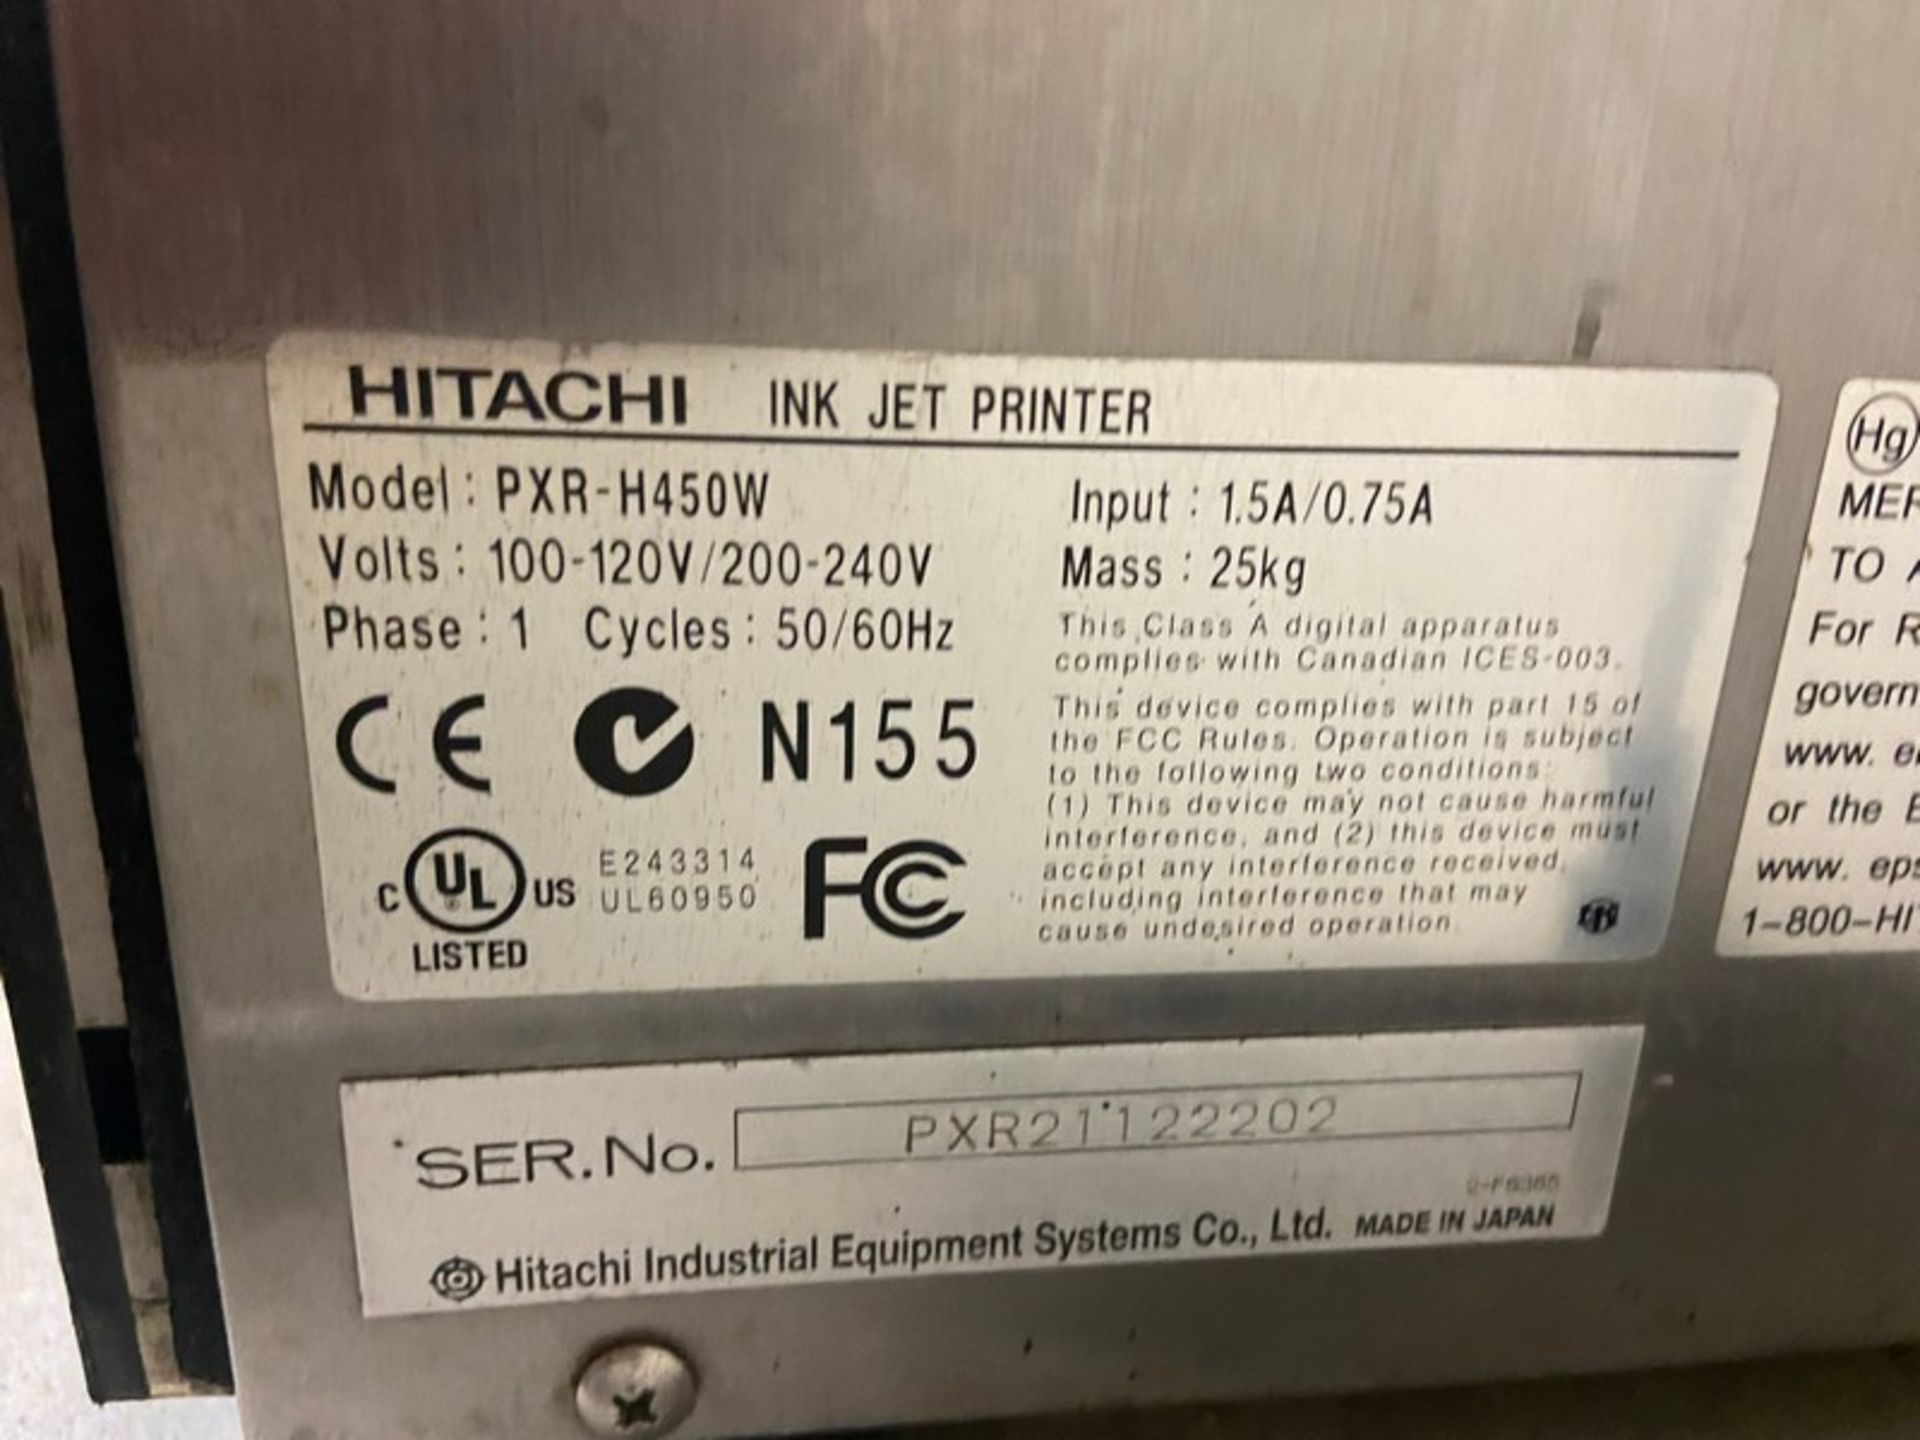 HITACHI Ink Jet Printer, M/N PXR-H450W, S/N PXR21122202, 100-120/200-240 Volts, 1 Phase, with Ink - Image 4 of 5